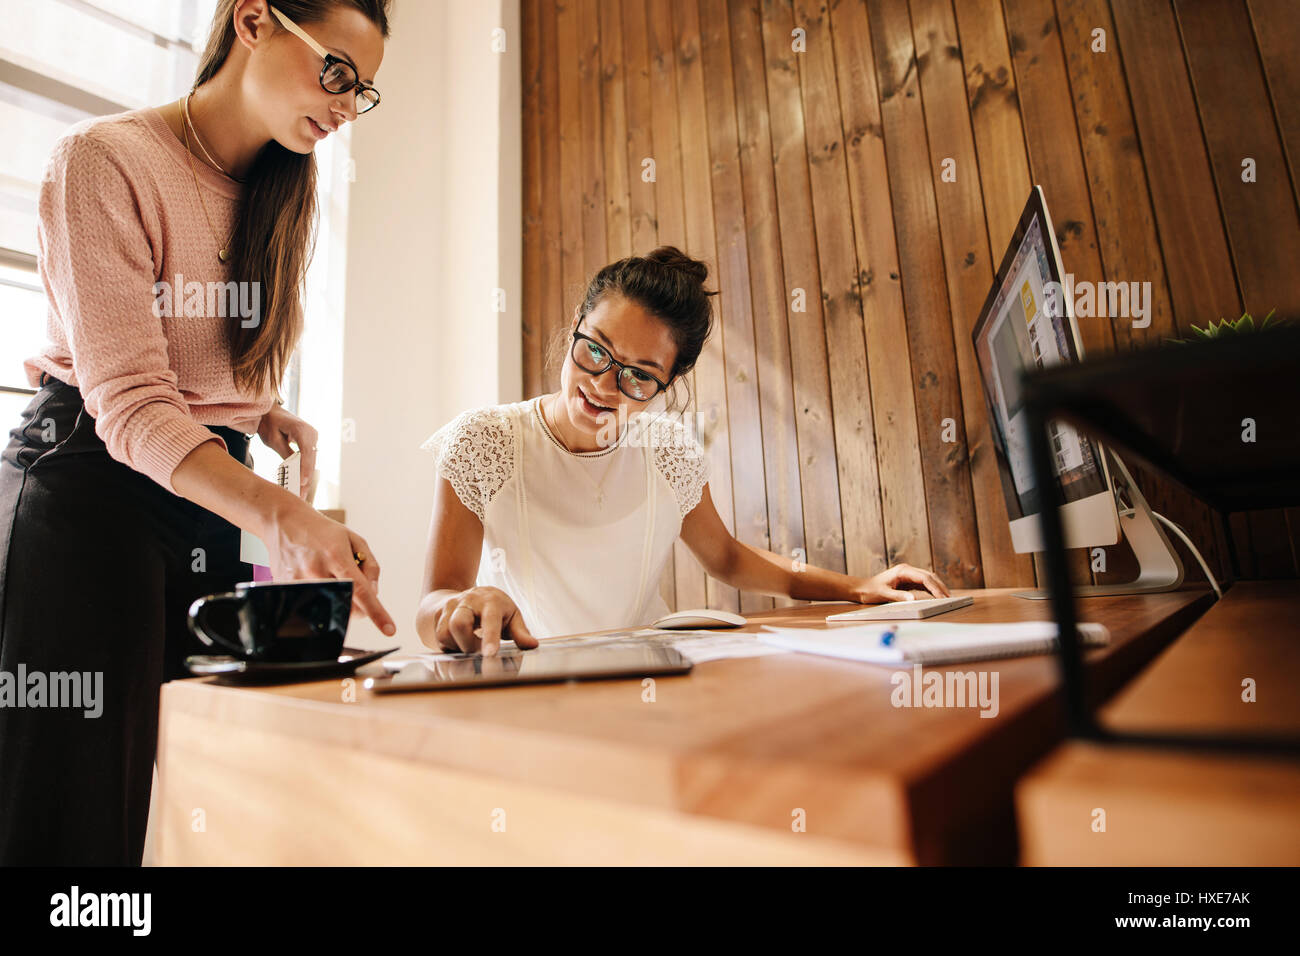 Business colleagues working together in office. Business professionals discussing new ideas on desk. Stock Photo